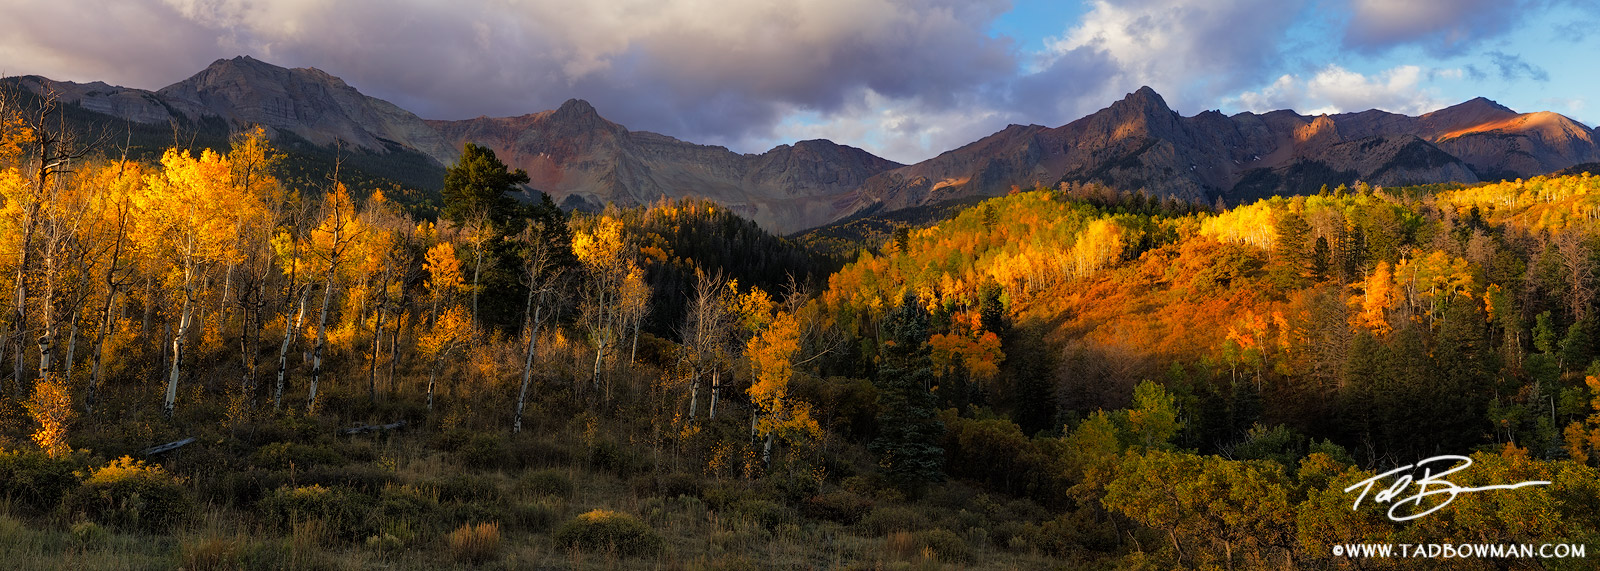 This Colorado fall mountain photo depicts stormy conditions over mountain peaks in the Sneffels Wilderness with sunlight painting...